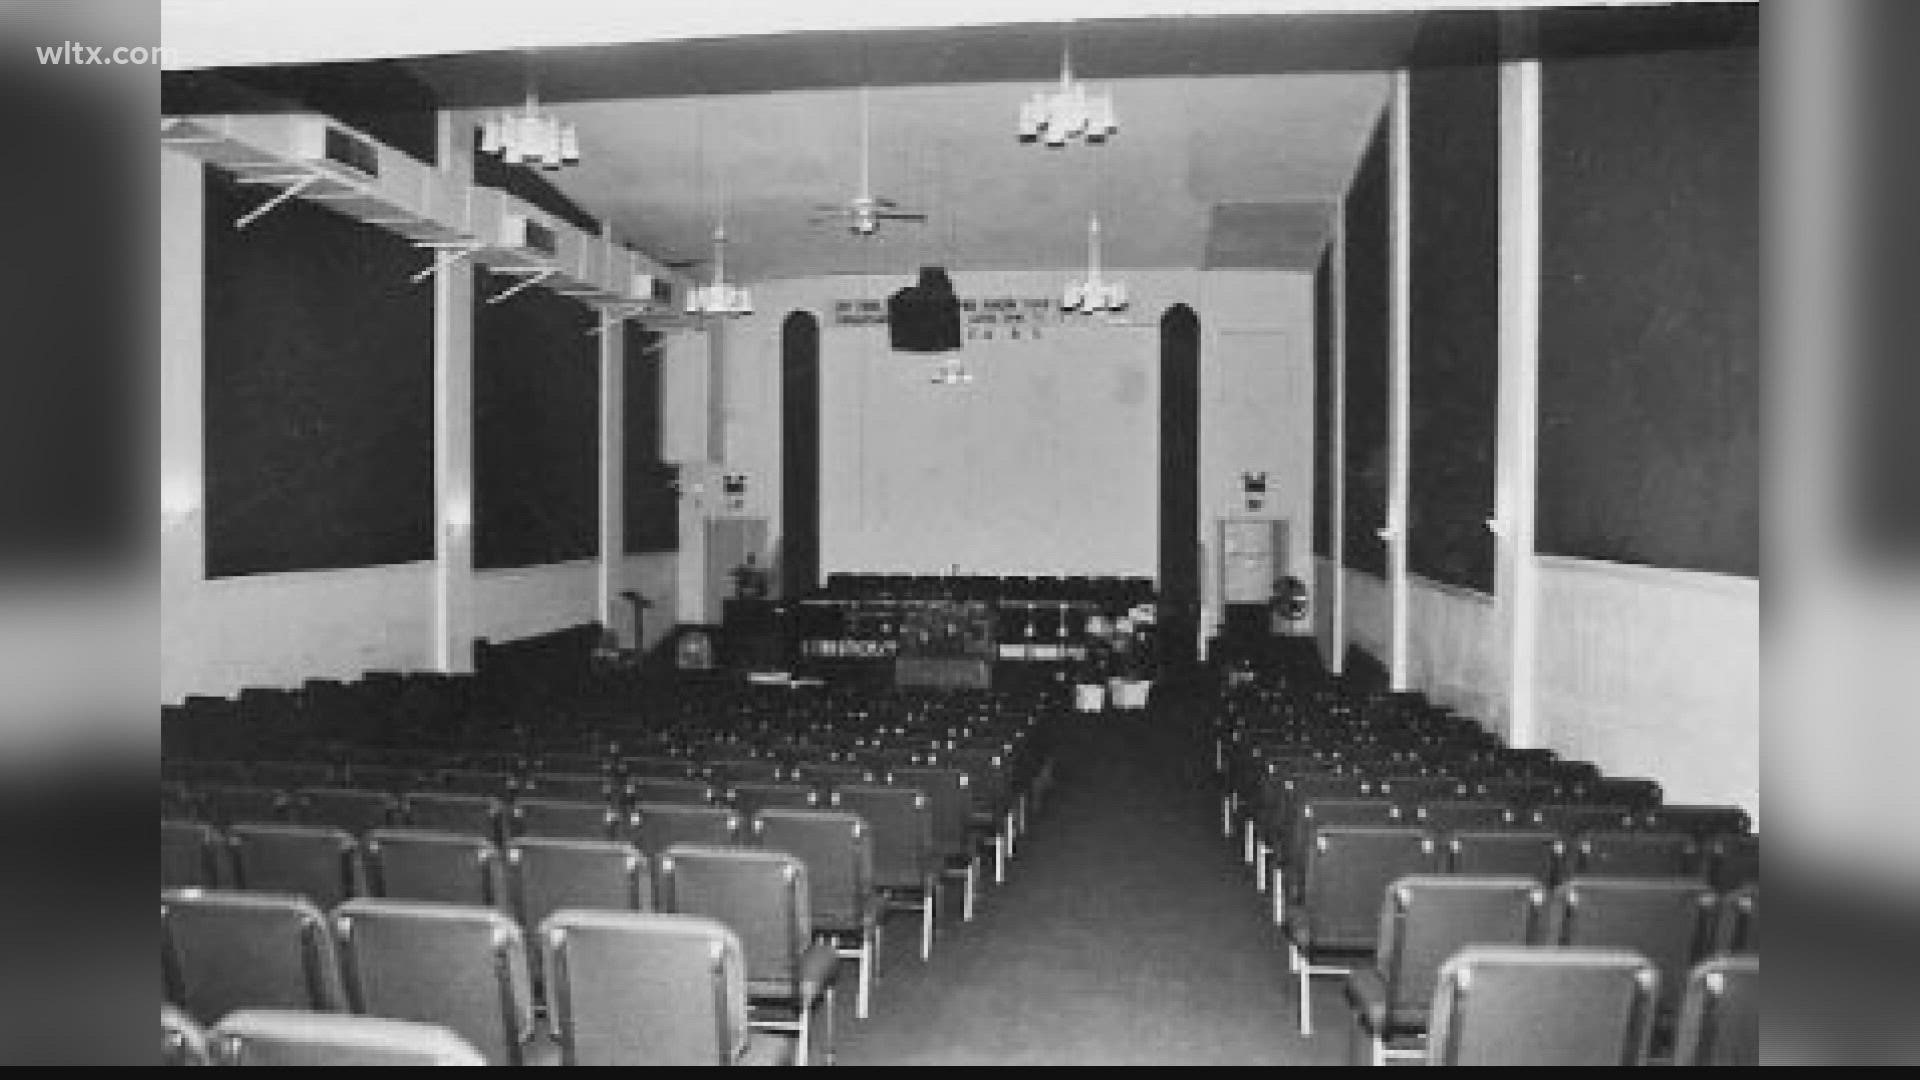 Historic Carver Theatre was one of two movie theaters in Columbia built in the 1940s specifically for African American patrons.